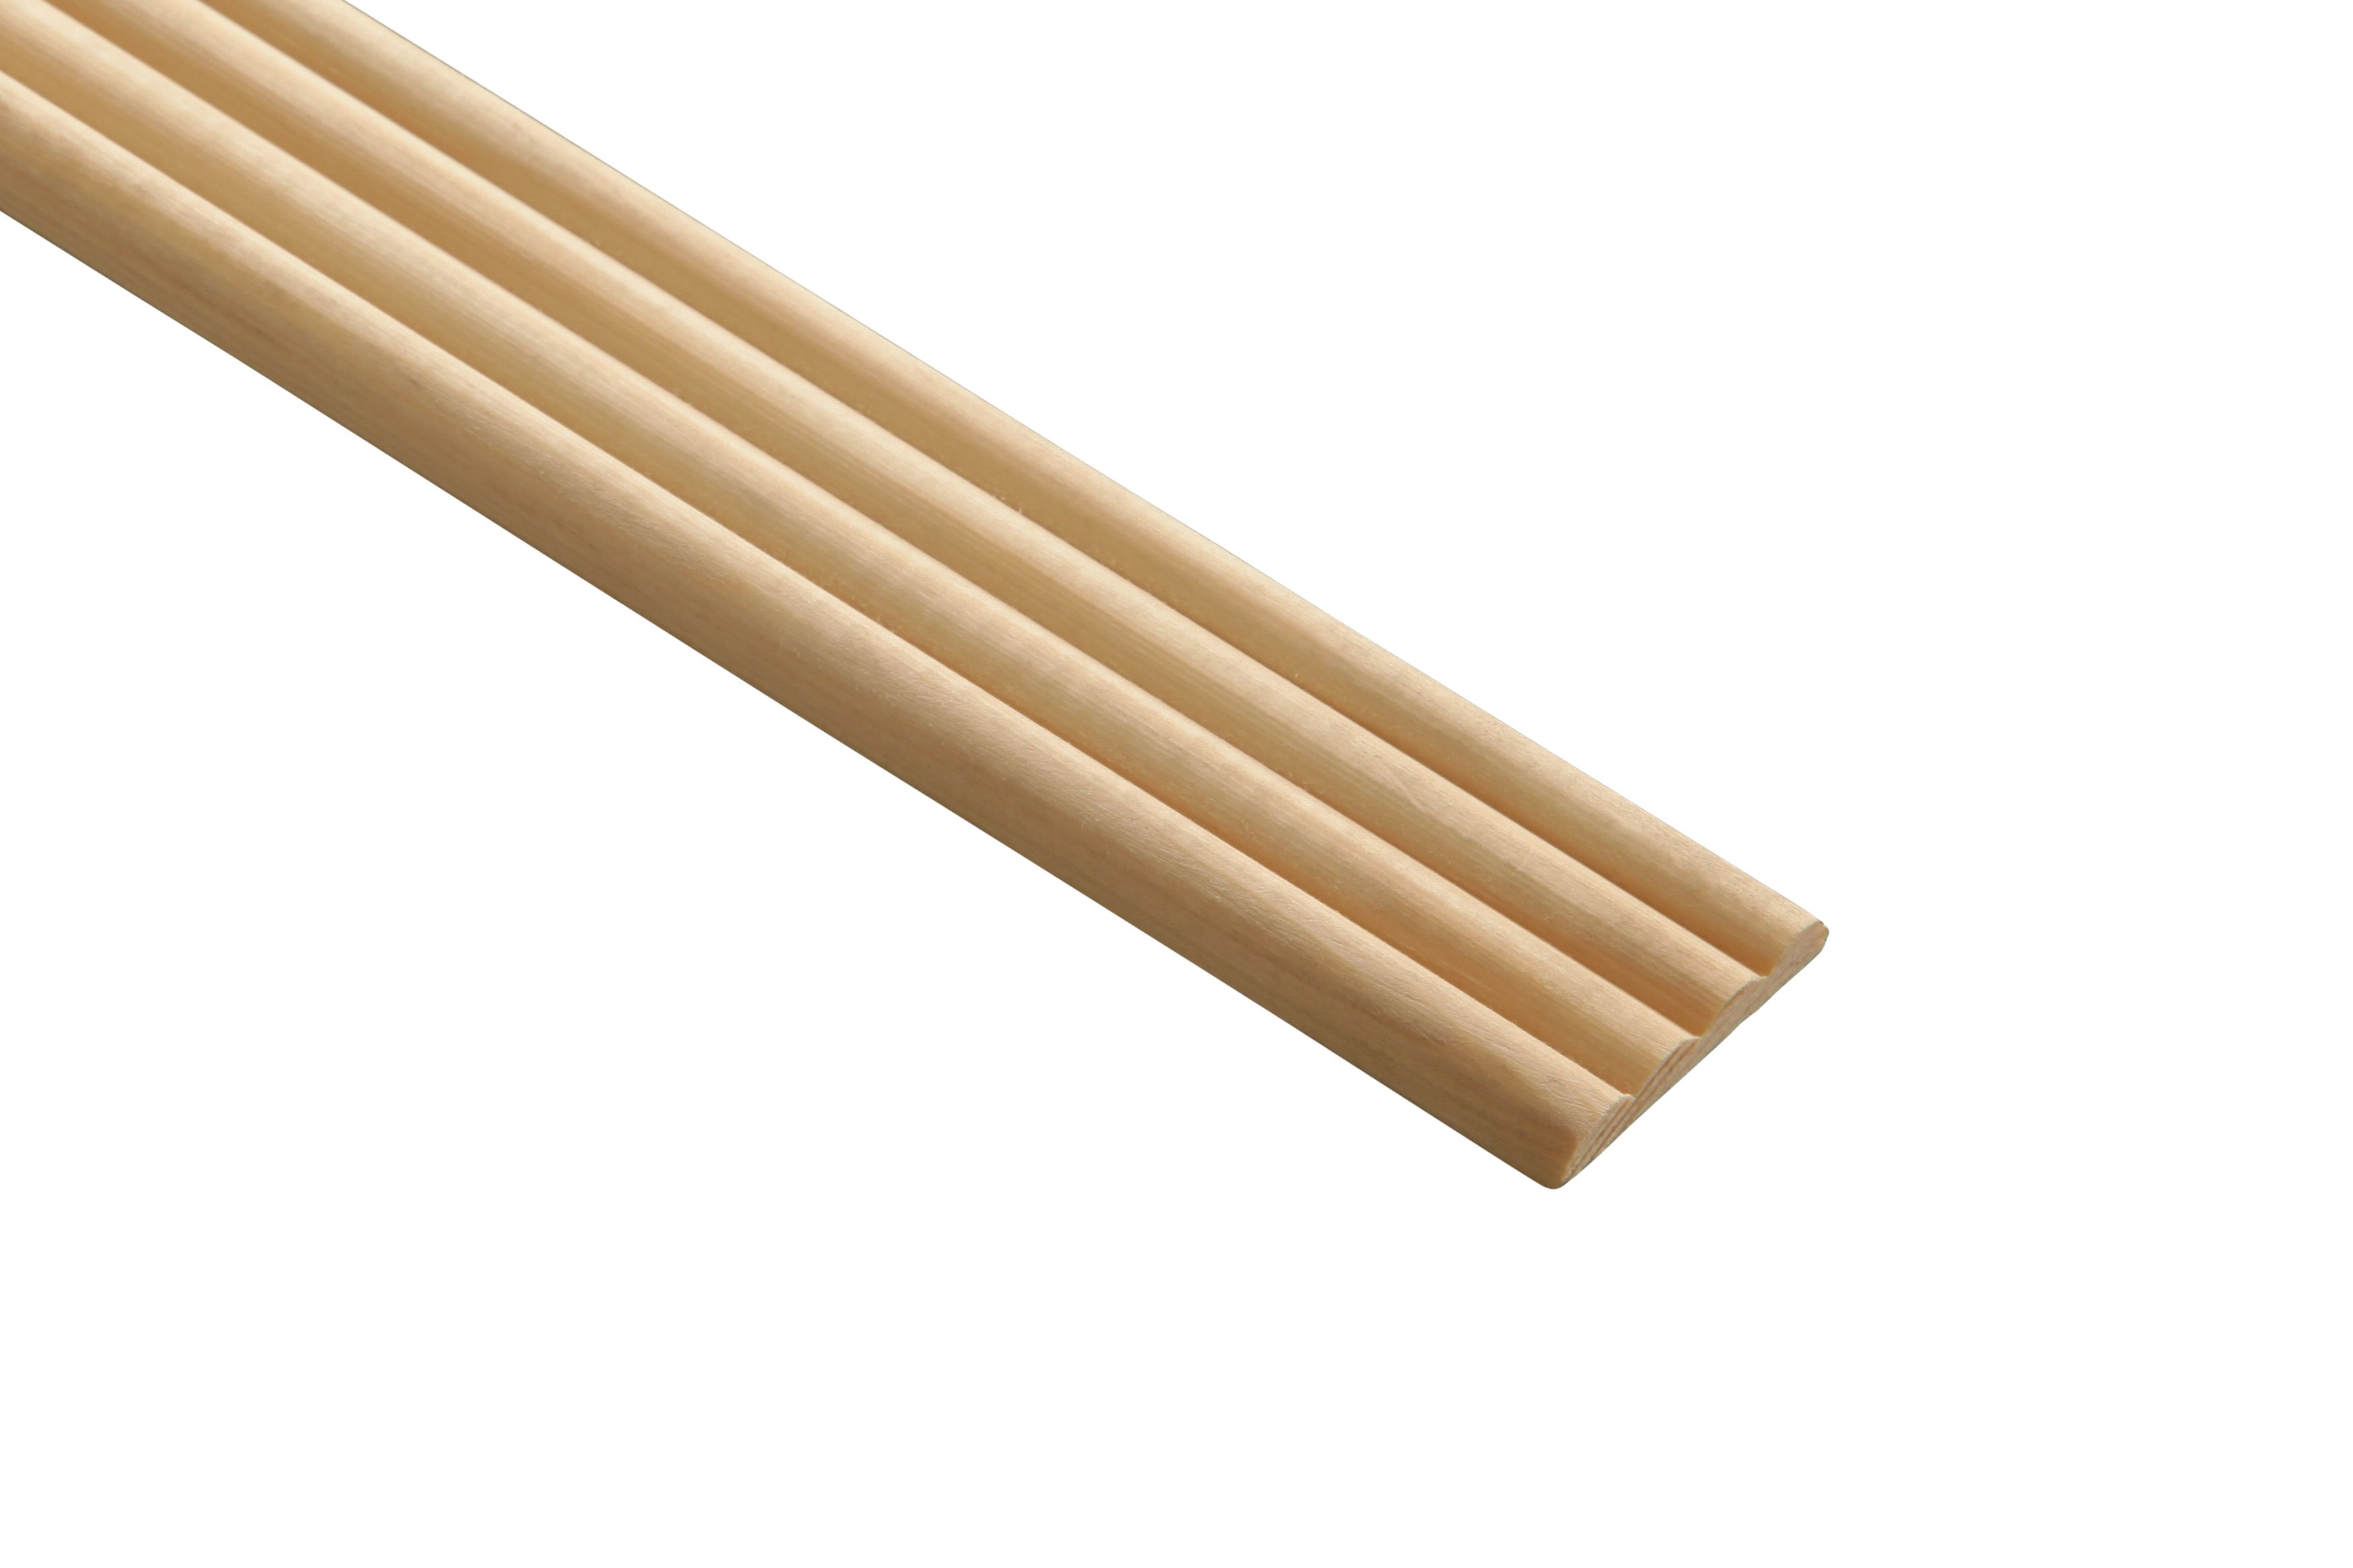 Image of Wickes Pine Reed Moulding - 34 x 6 x 2400mm